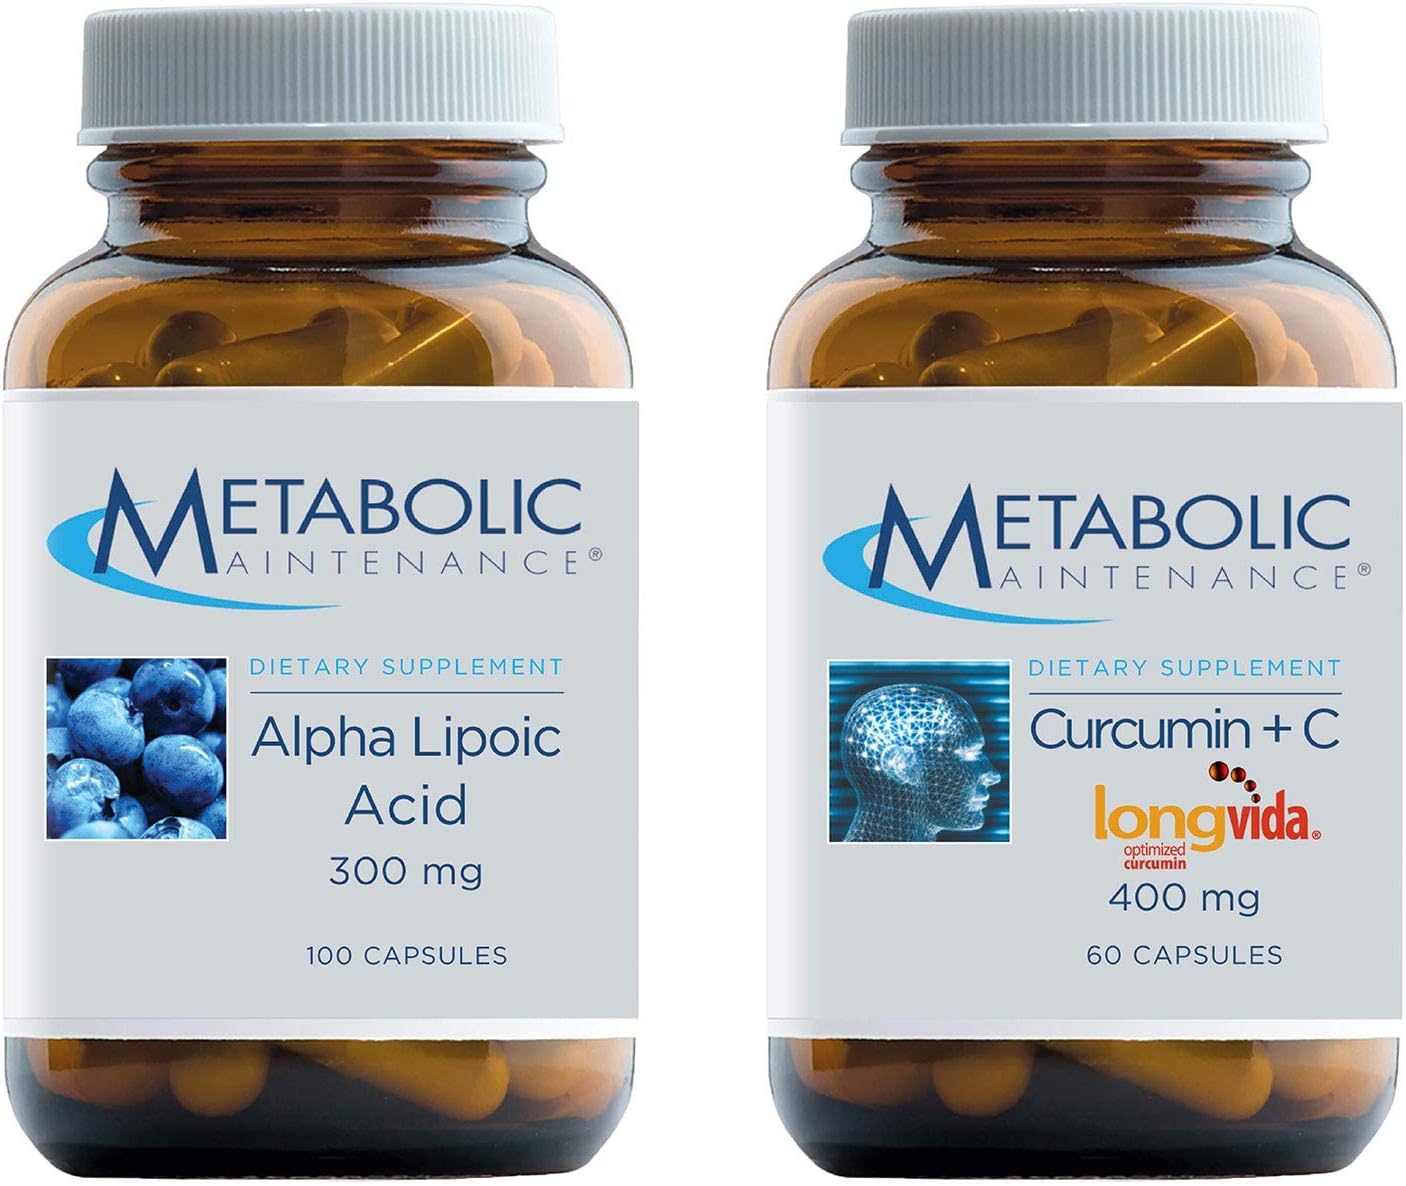 Metabolic Maintenance Set with Alpha Lipoic Acid - 300mg ALA, Supports Nerve + Liver Health (100 Capsules) + Curcumin + Vitamin C (Longvida) Supplement, Supports Healthy Brain Function (60 Capsules)